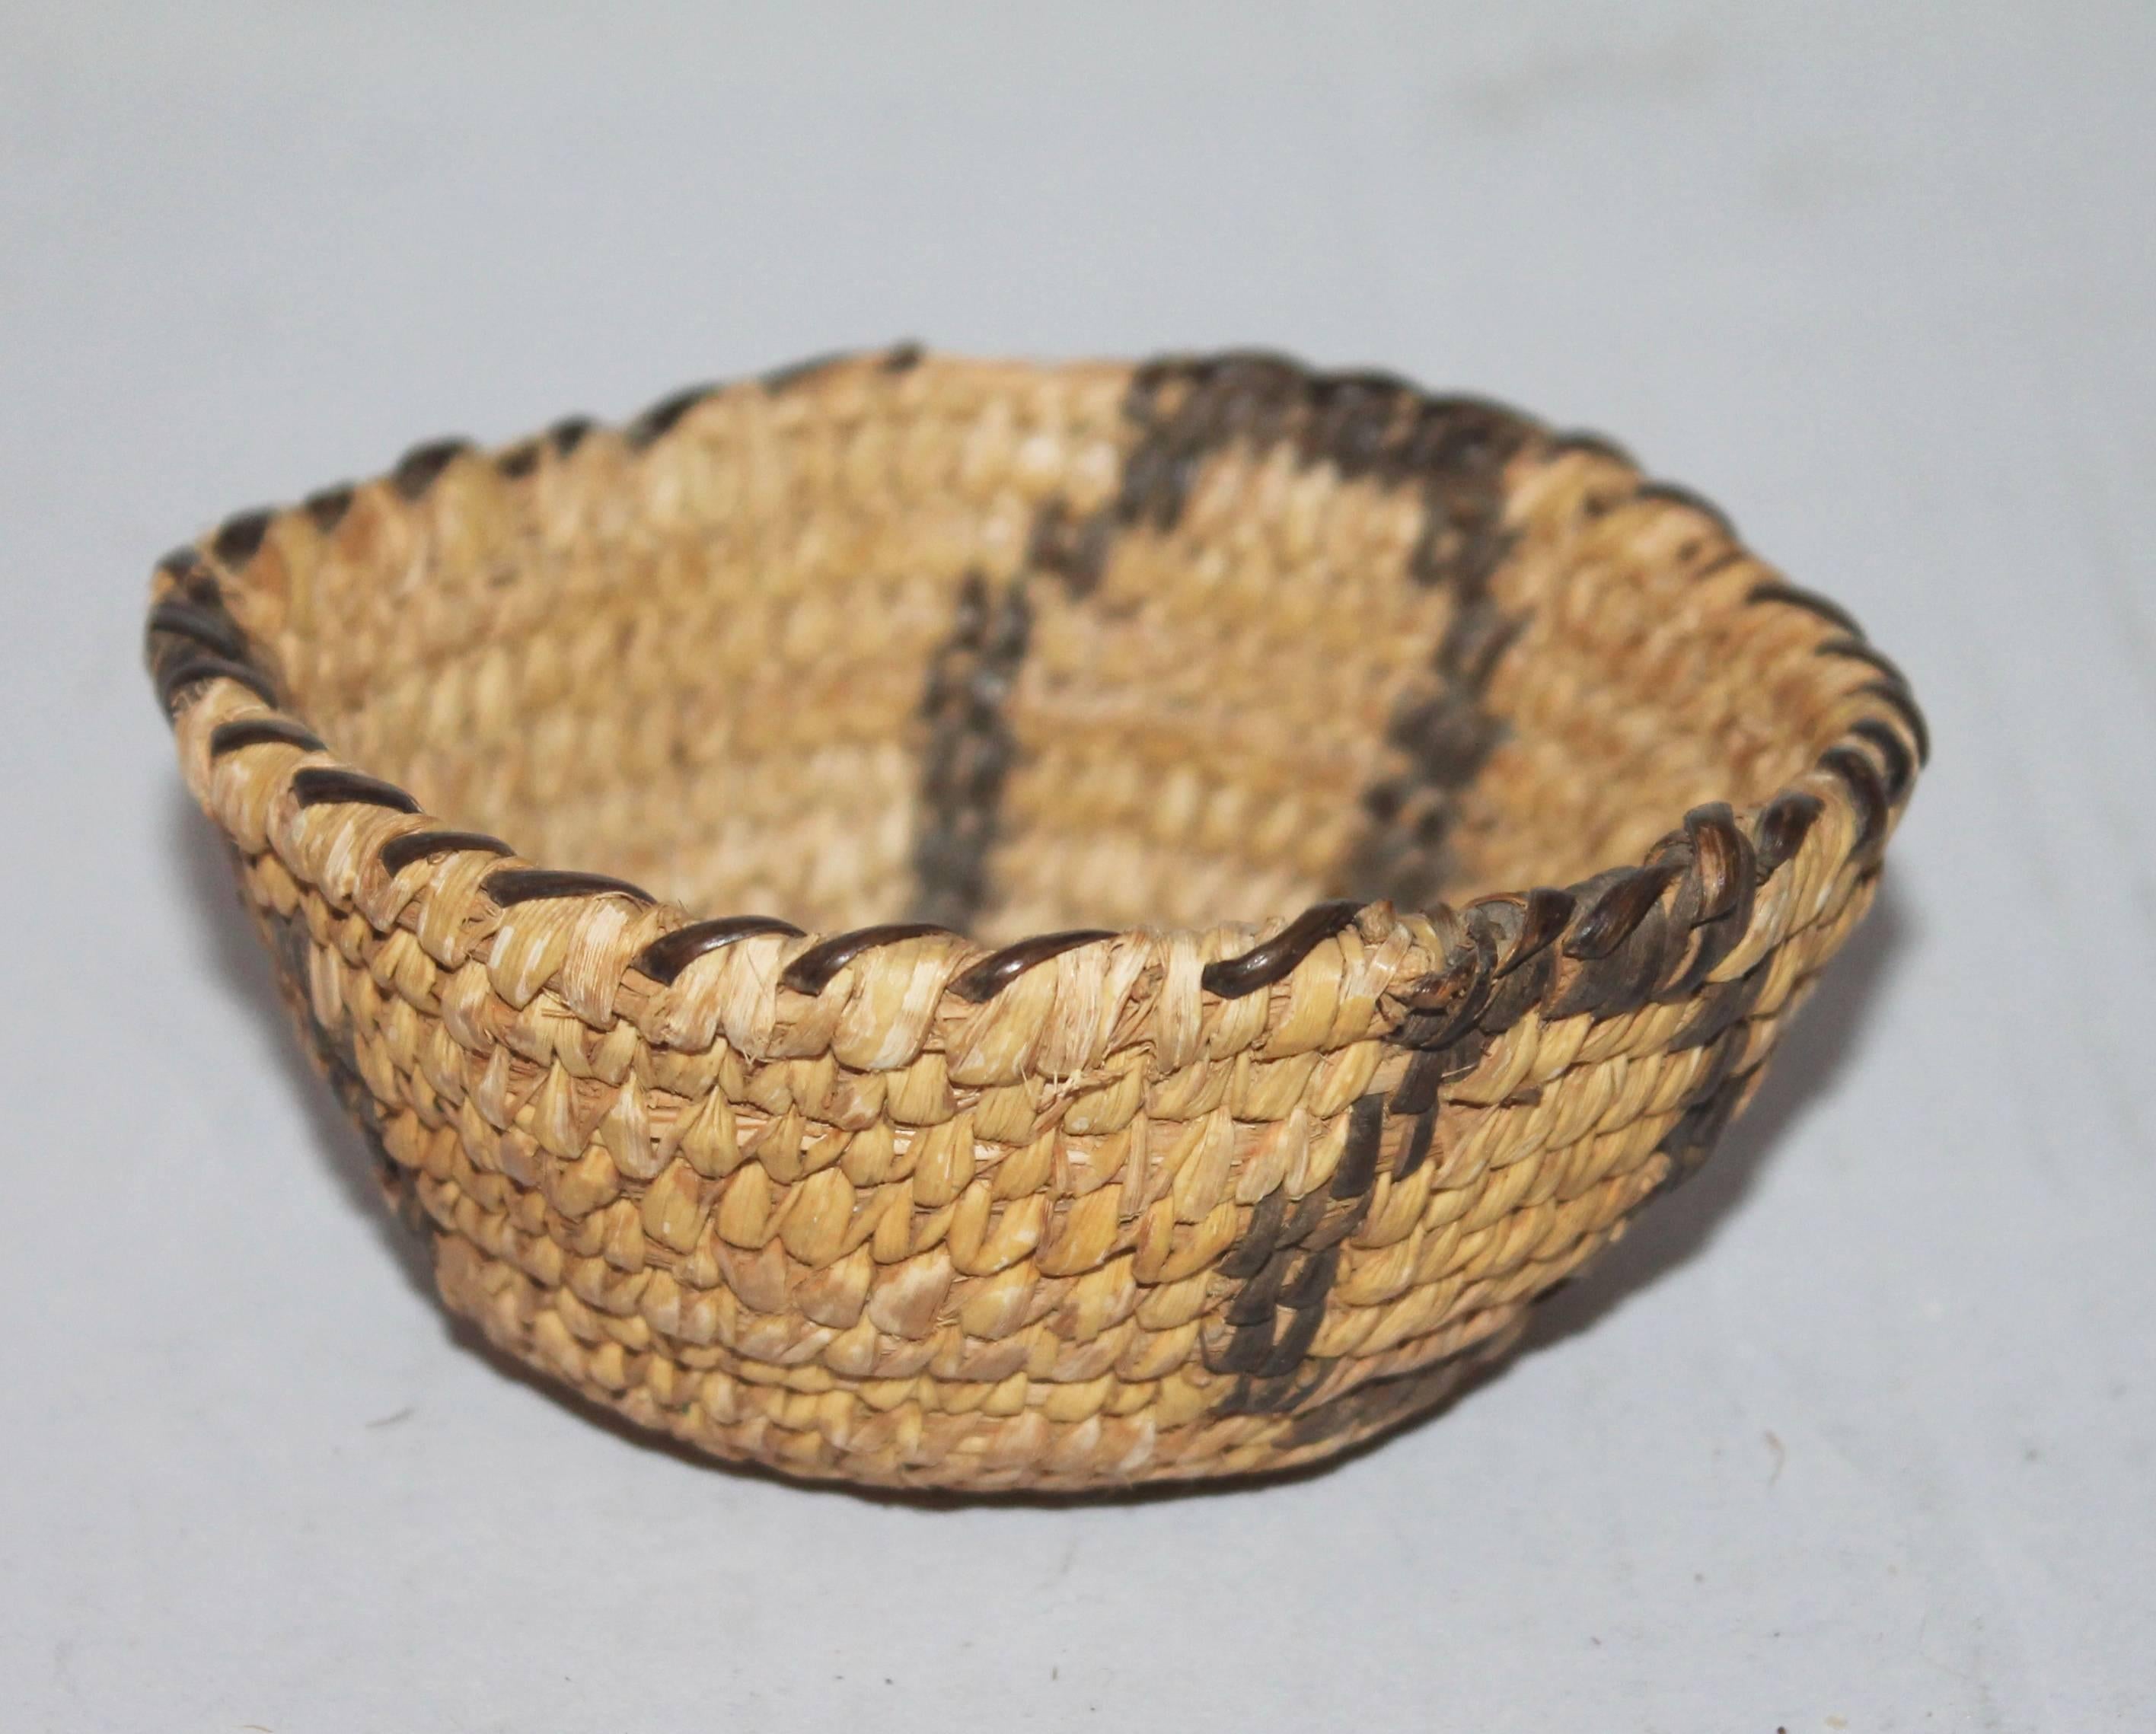 This is a fine example of miniature Indian basketry. This small Papago American Indian basket is a great addition to any Indian basket collection. The condition is very good with minor edge wear in one area.